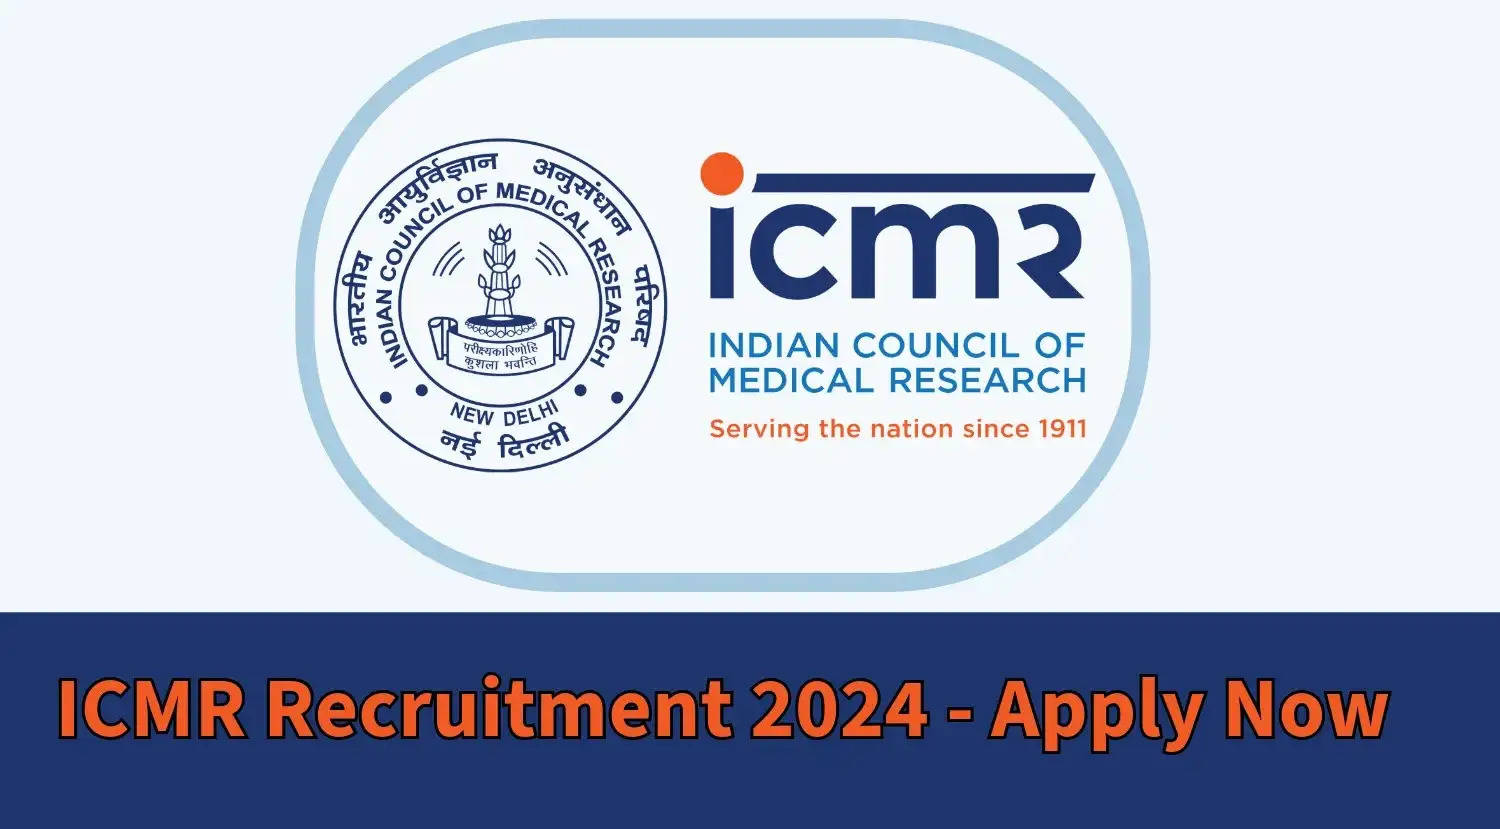 ICMR faculty recruitment 2024: Latest updates on vacancies, eligibility, application process